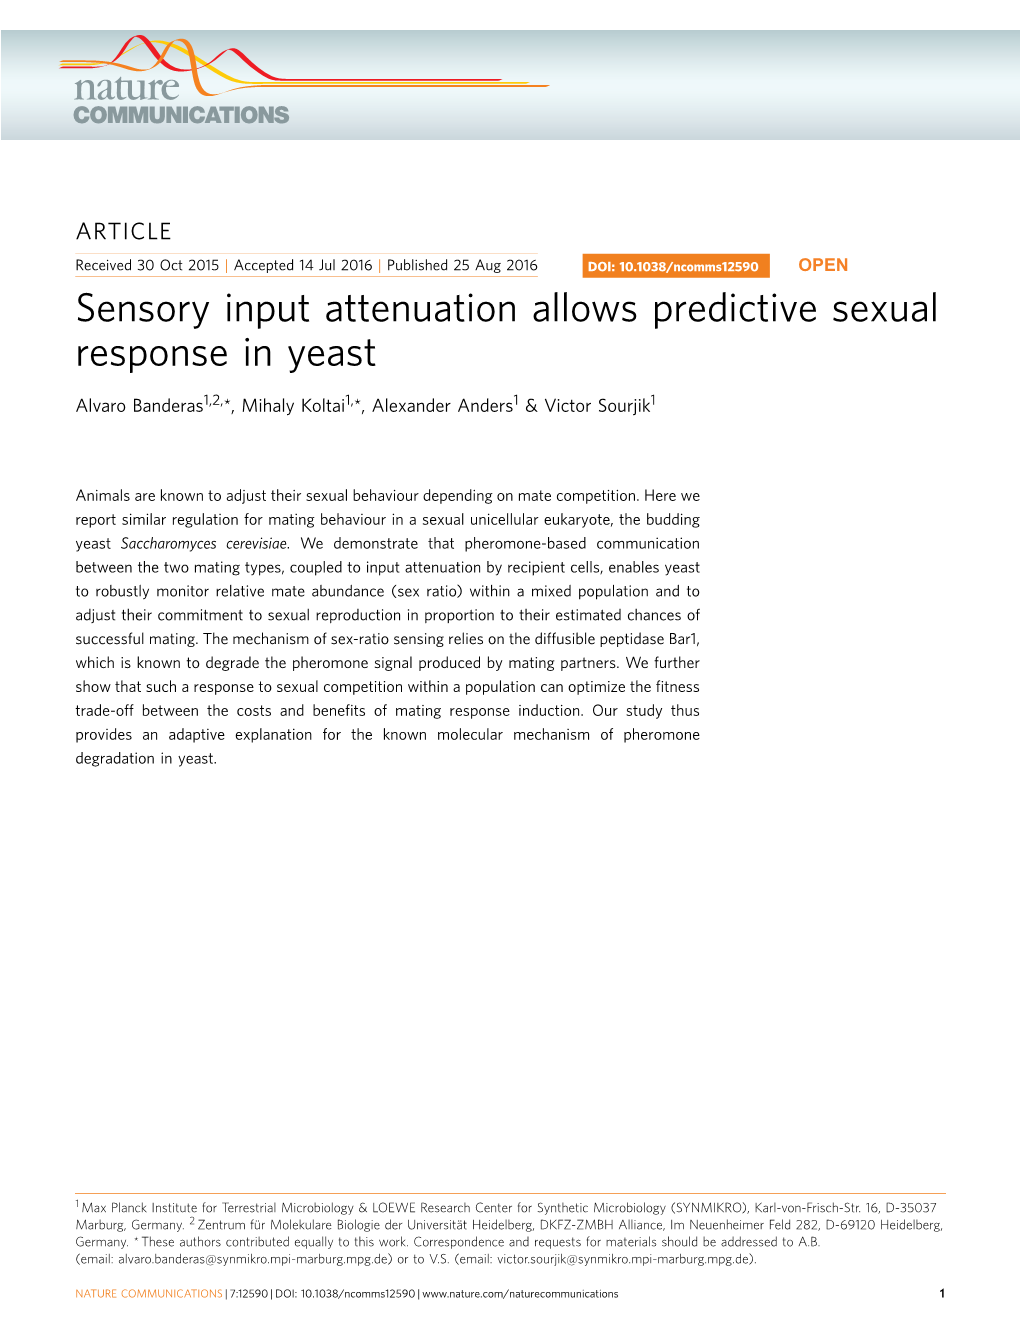 Sensory Input Attenuation Allows Predictive Sexual Response in Yeast